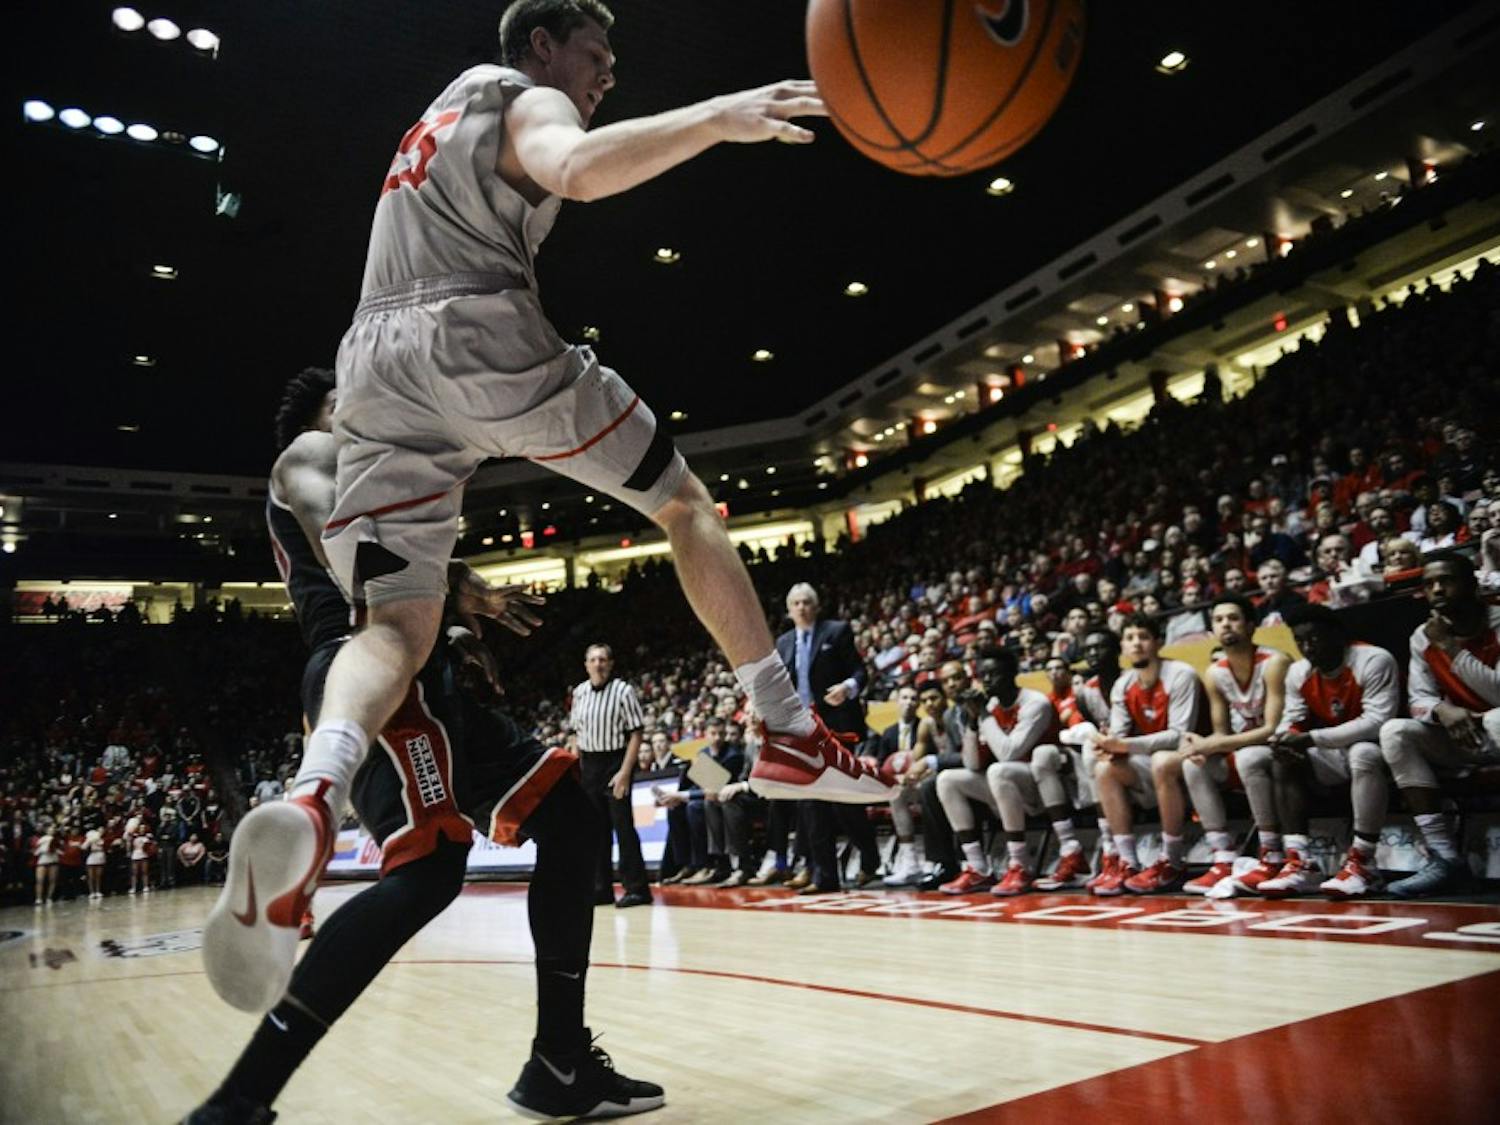 Junior forward Joe Furstinger jumps in the air to prevent a out of bound ball Tuesday, Jan. 10, 2016 at WisePies Arena. 